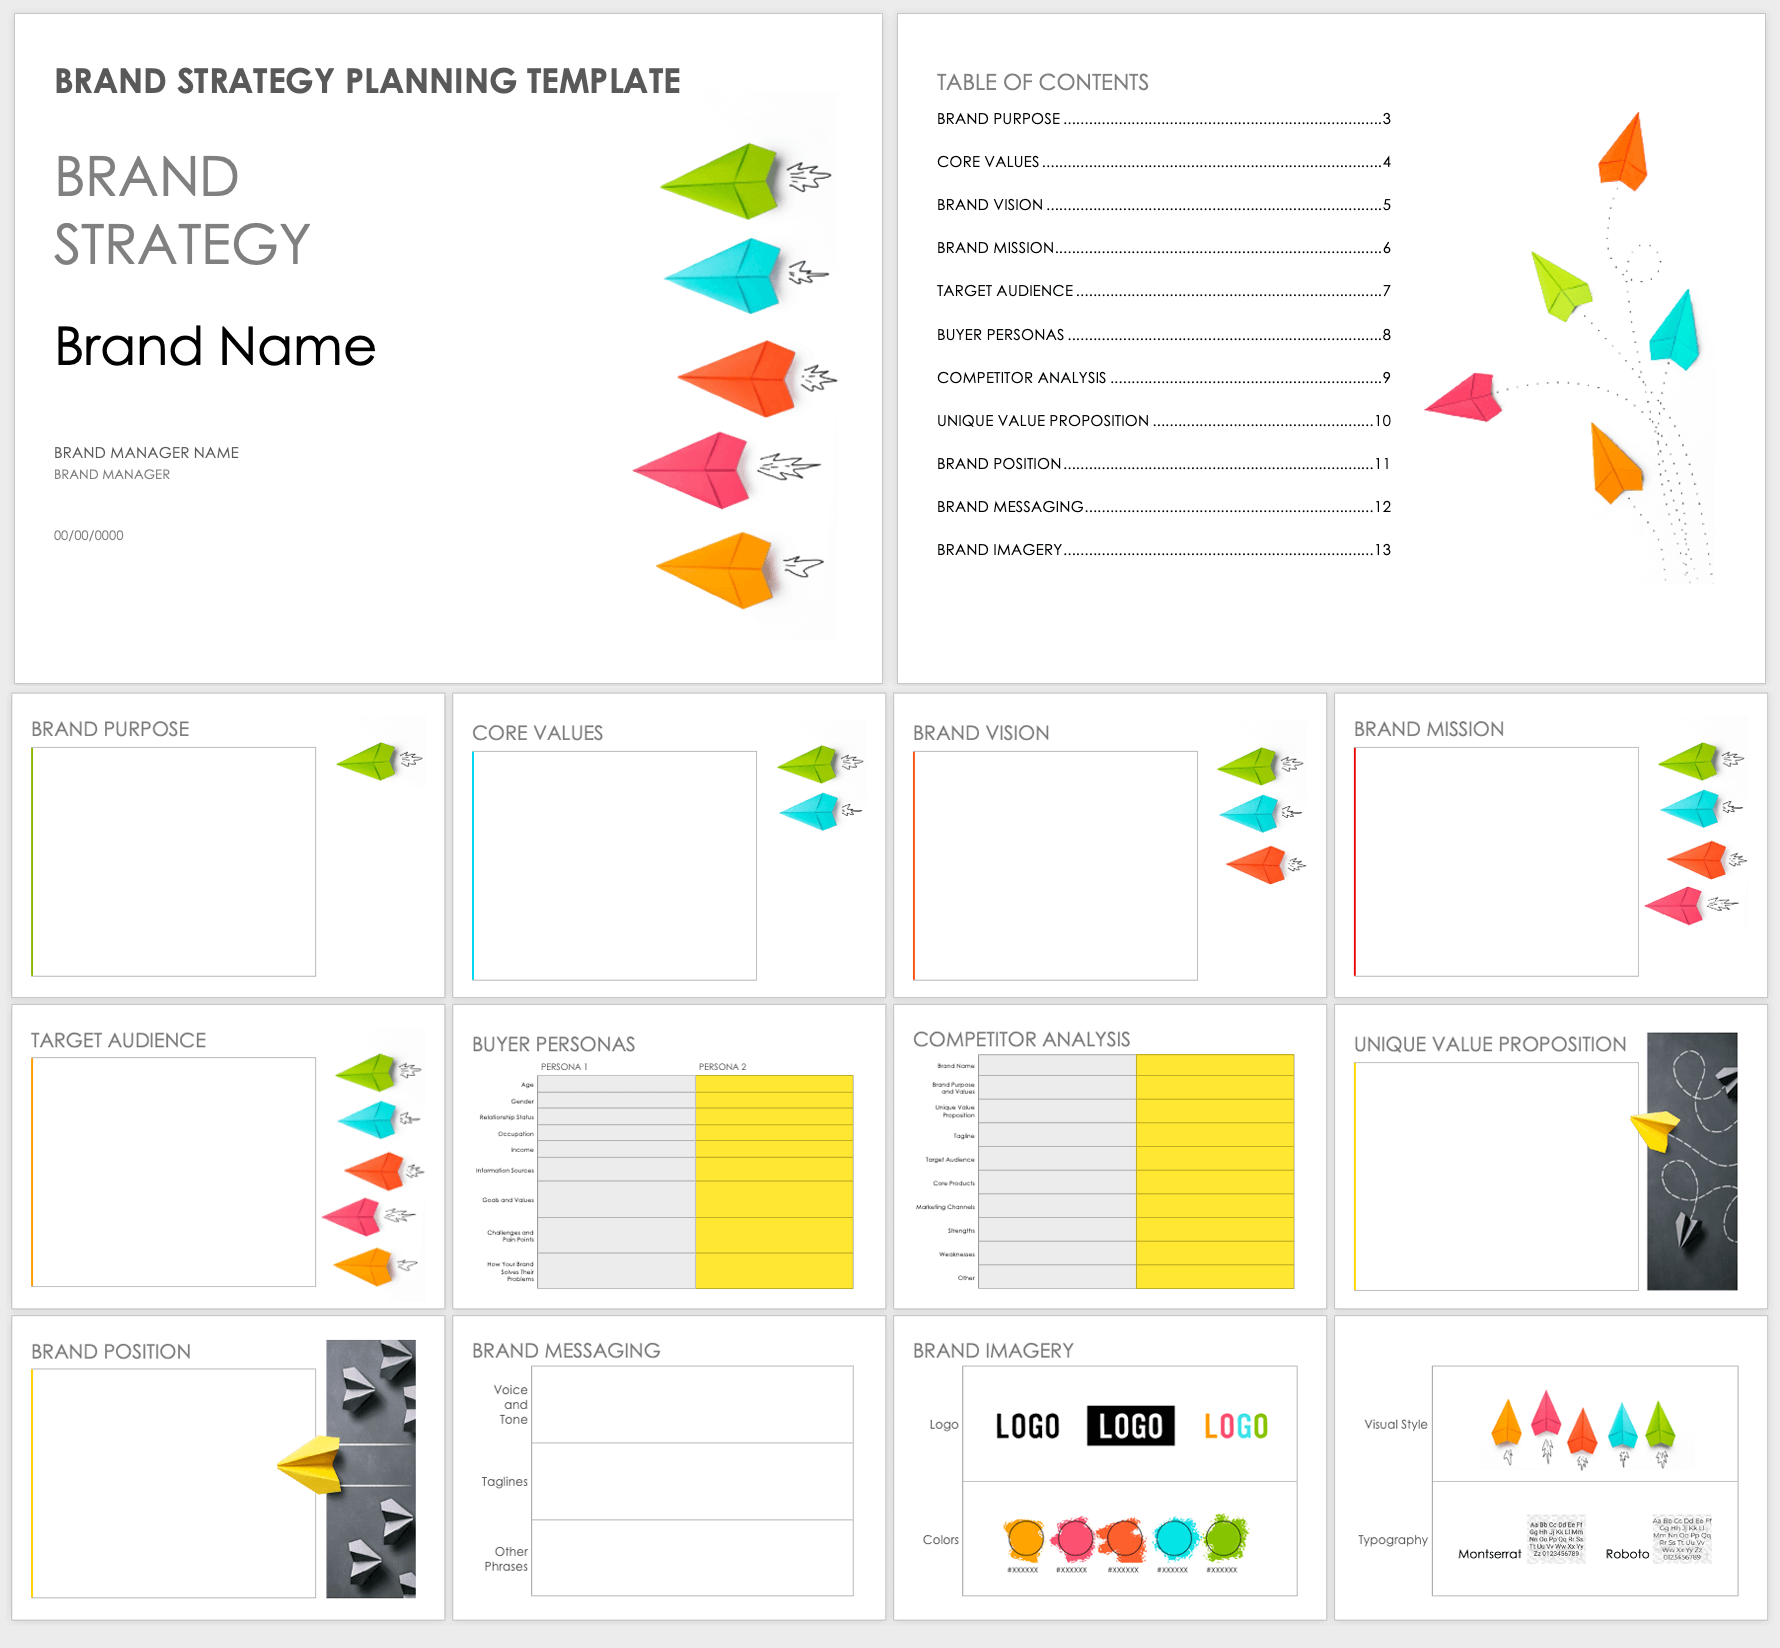 Brand Strategy Planning Template